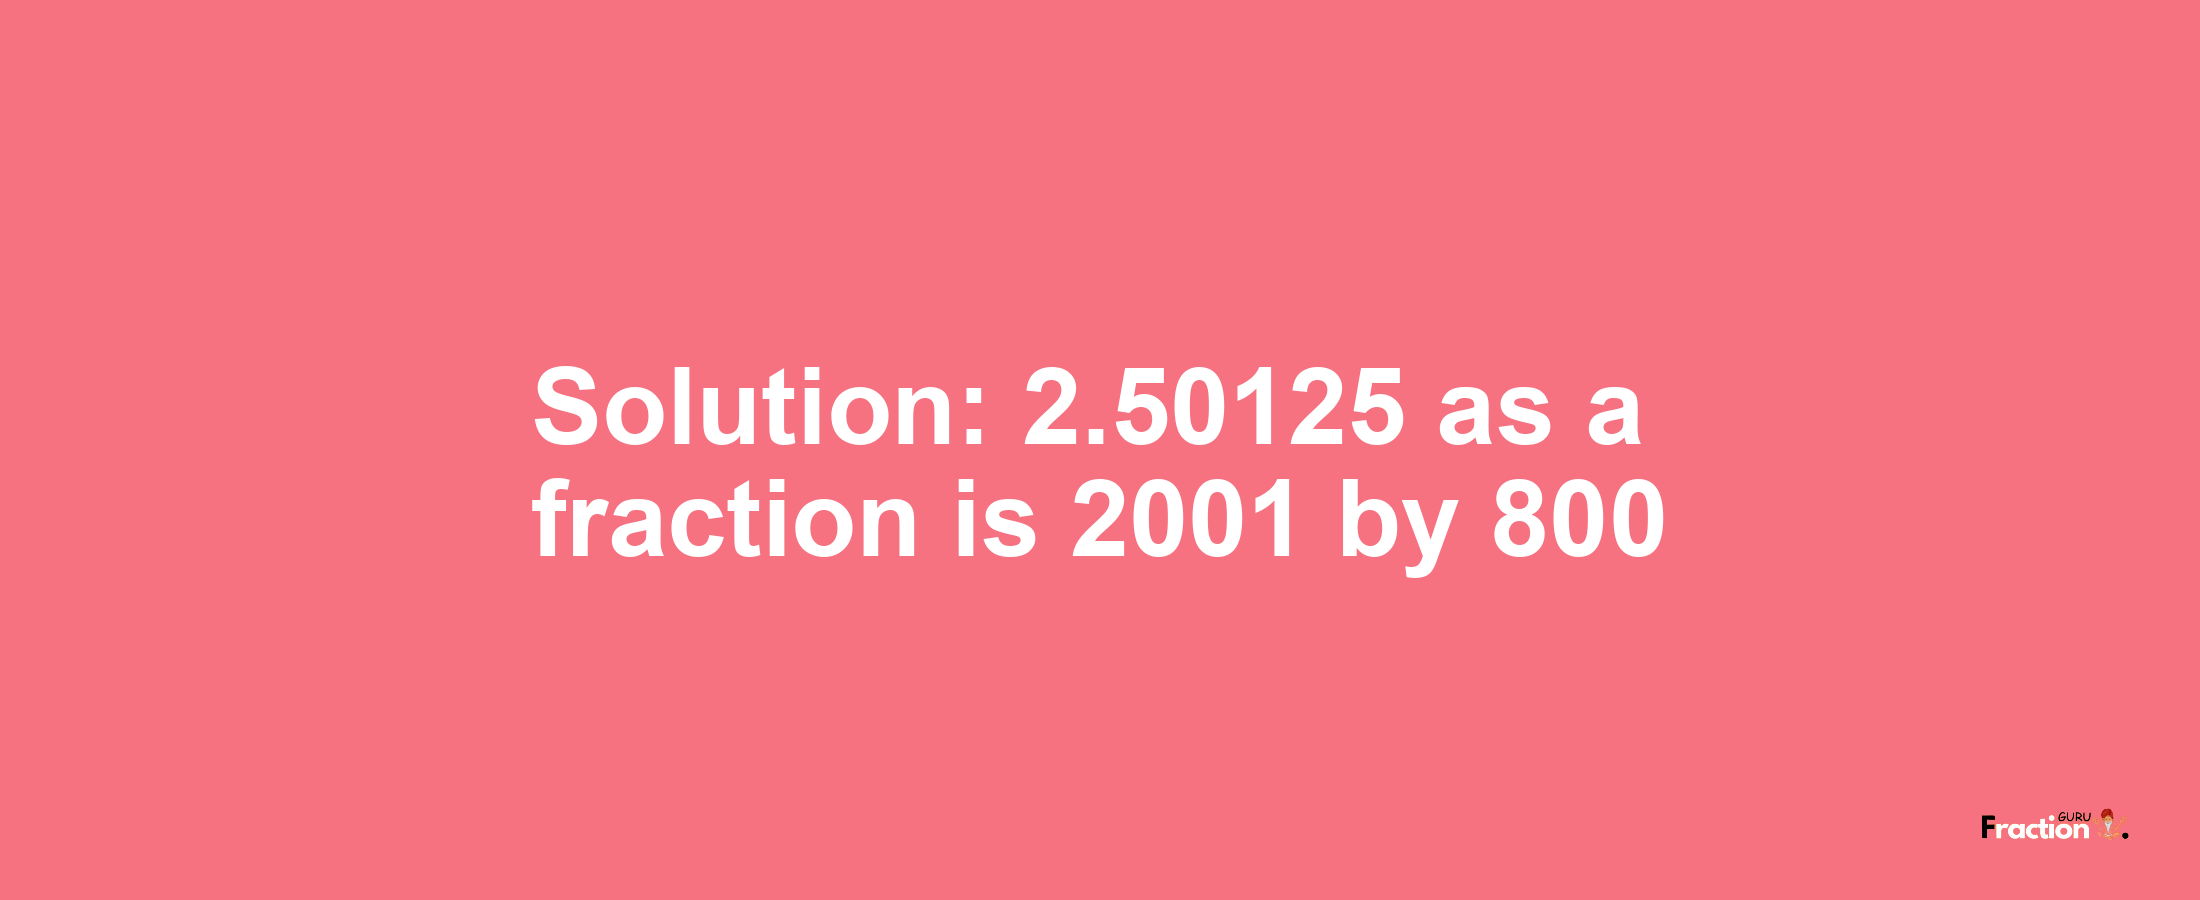 Solution:2.50125 as a fraction is 2001/800